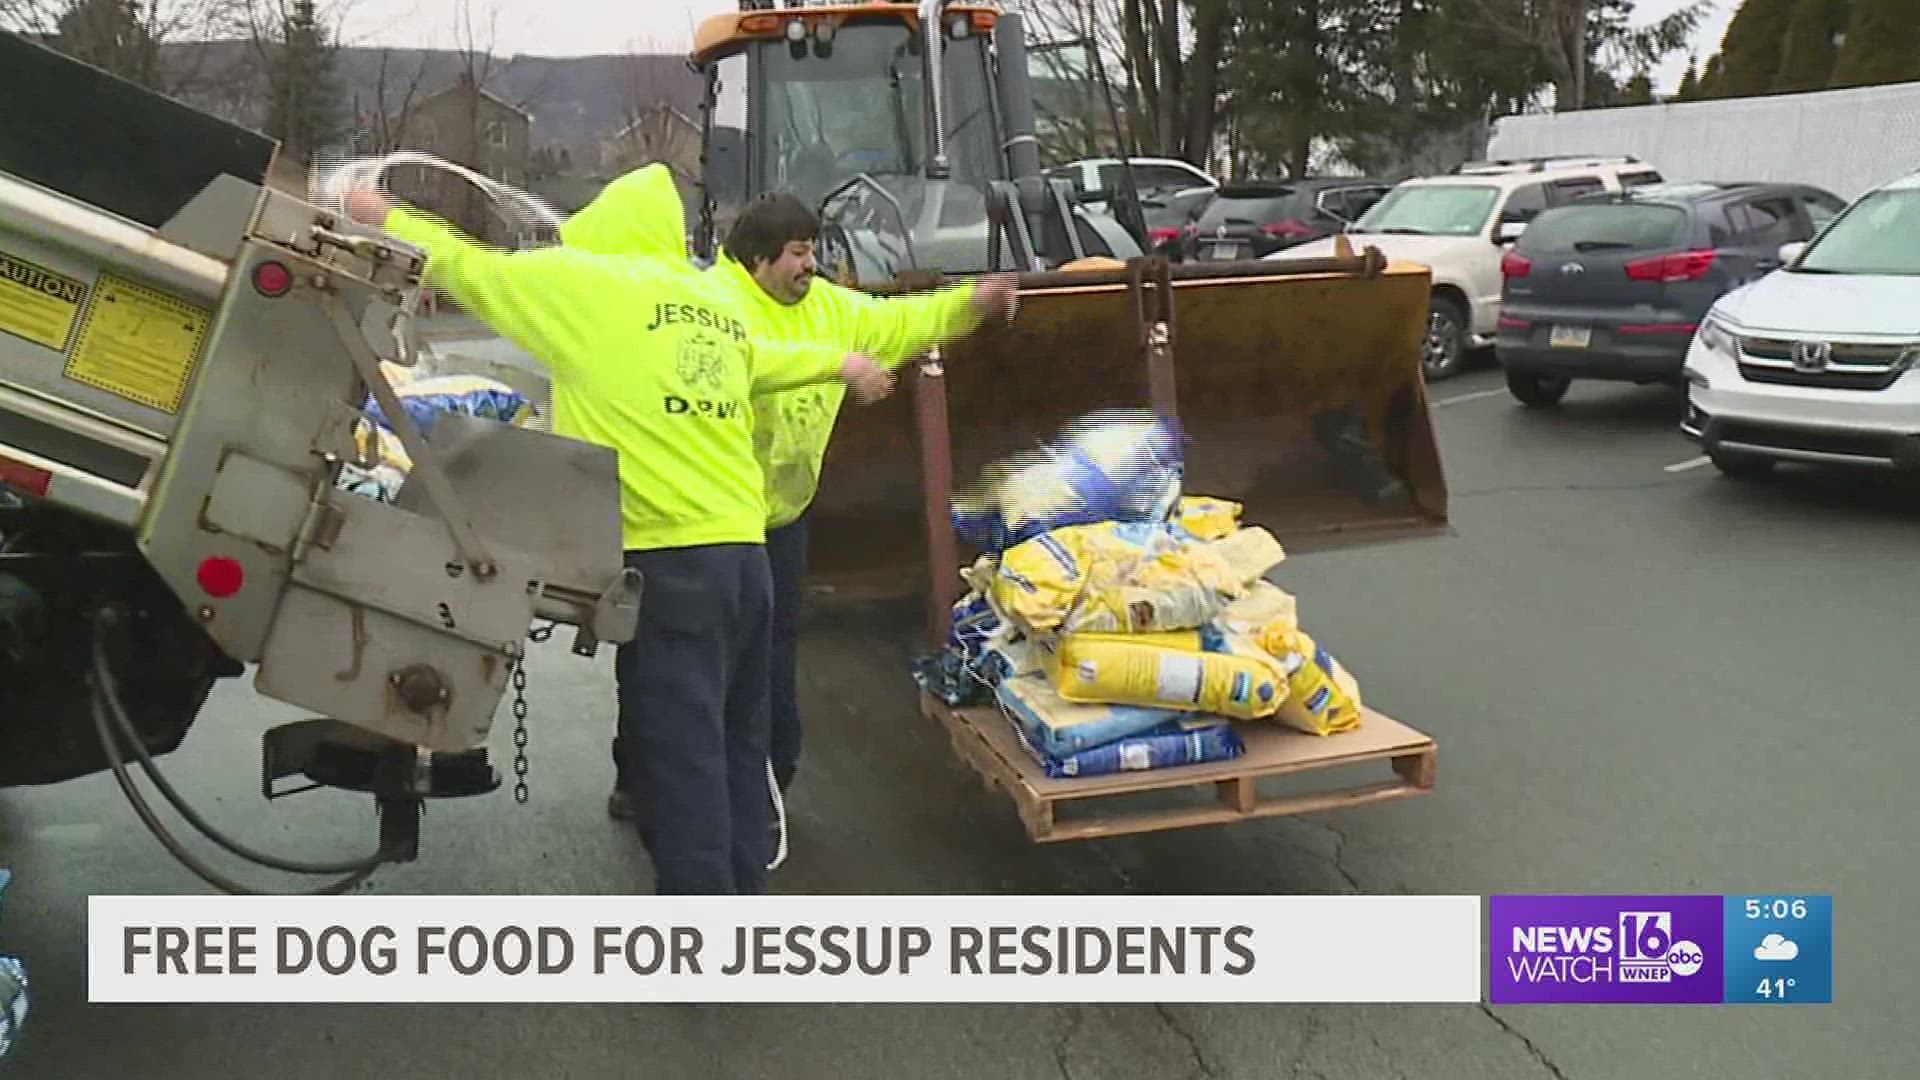 Newswatch 16's Courtney Harrison explains where the food came from and how folks with some four-legged friends were thankful for the extra chow.